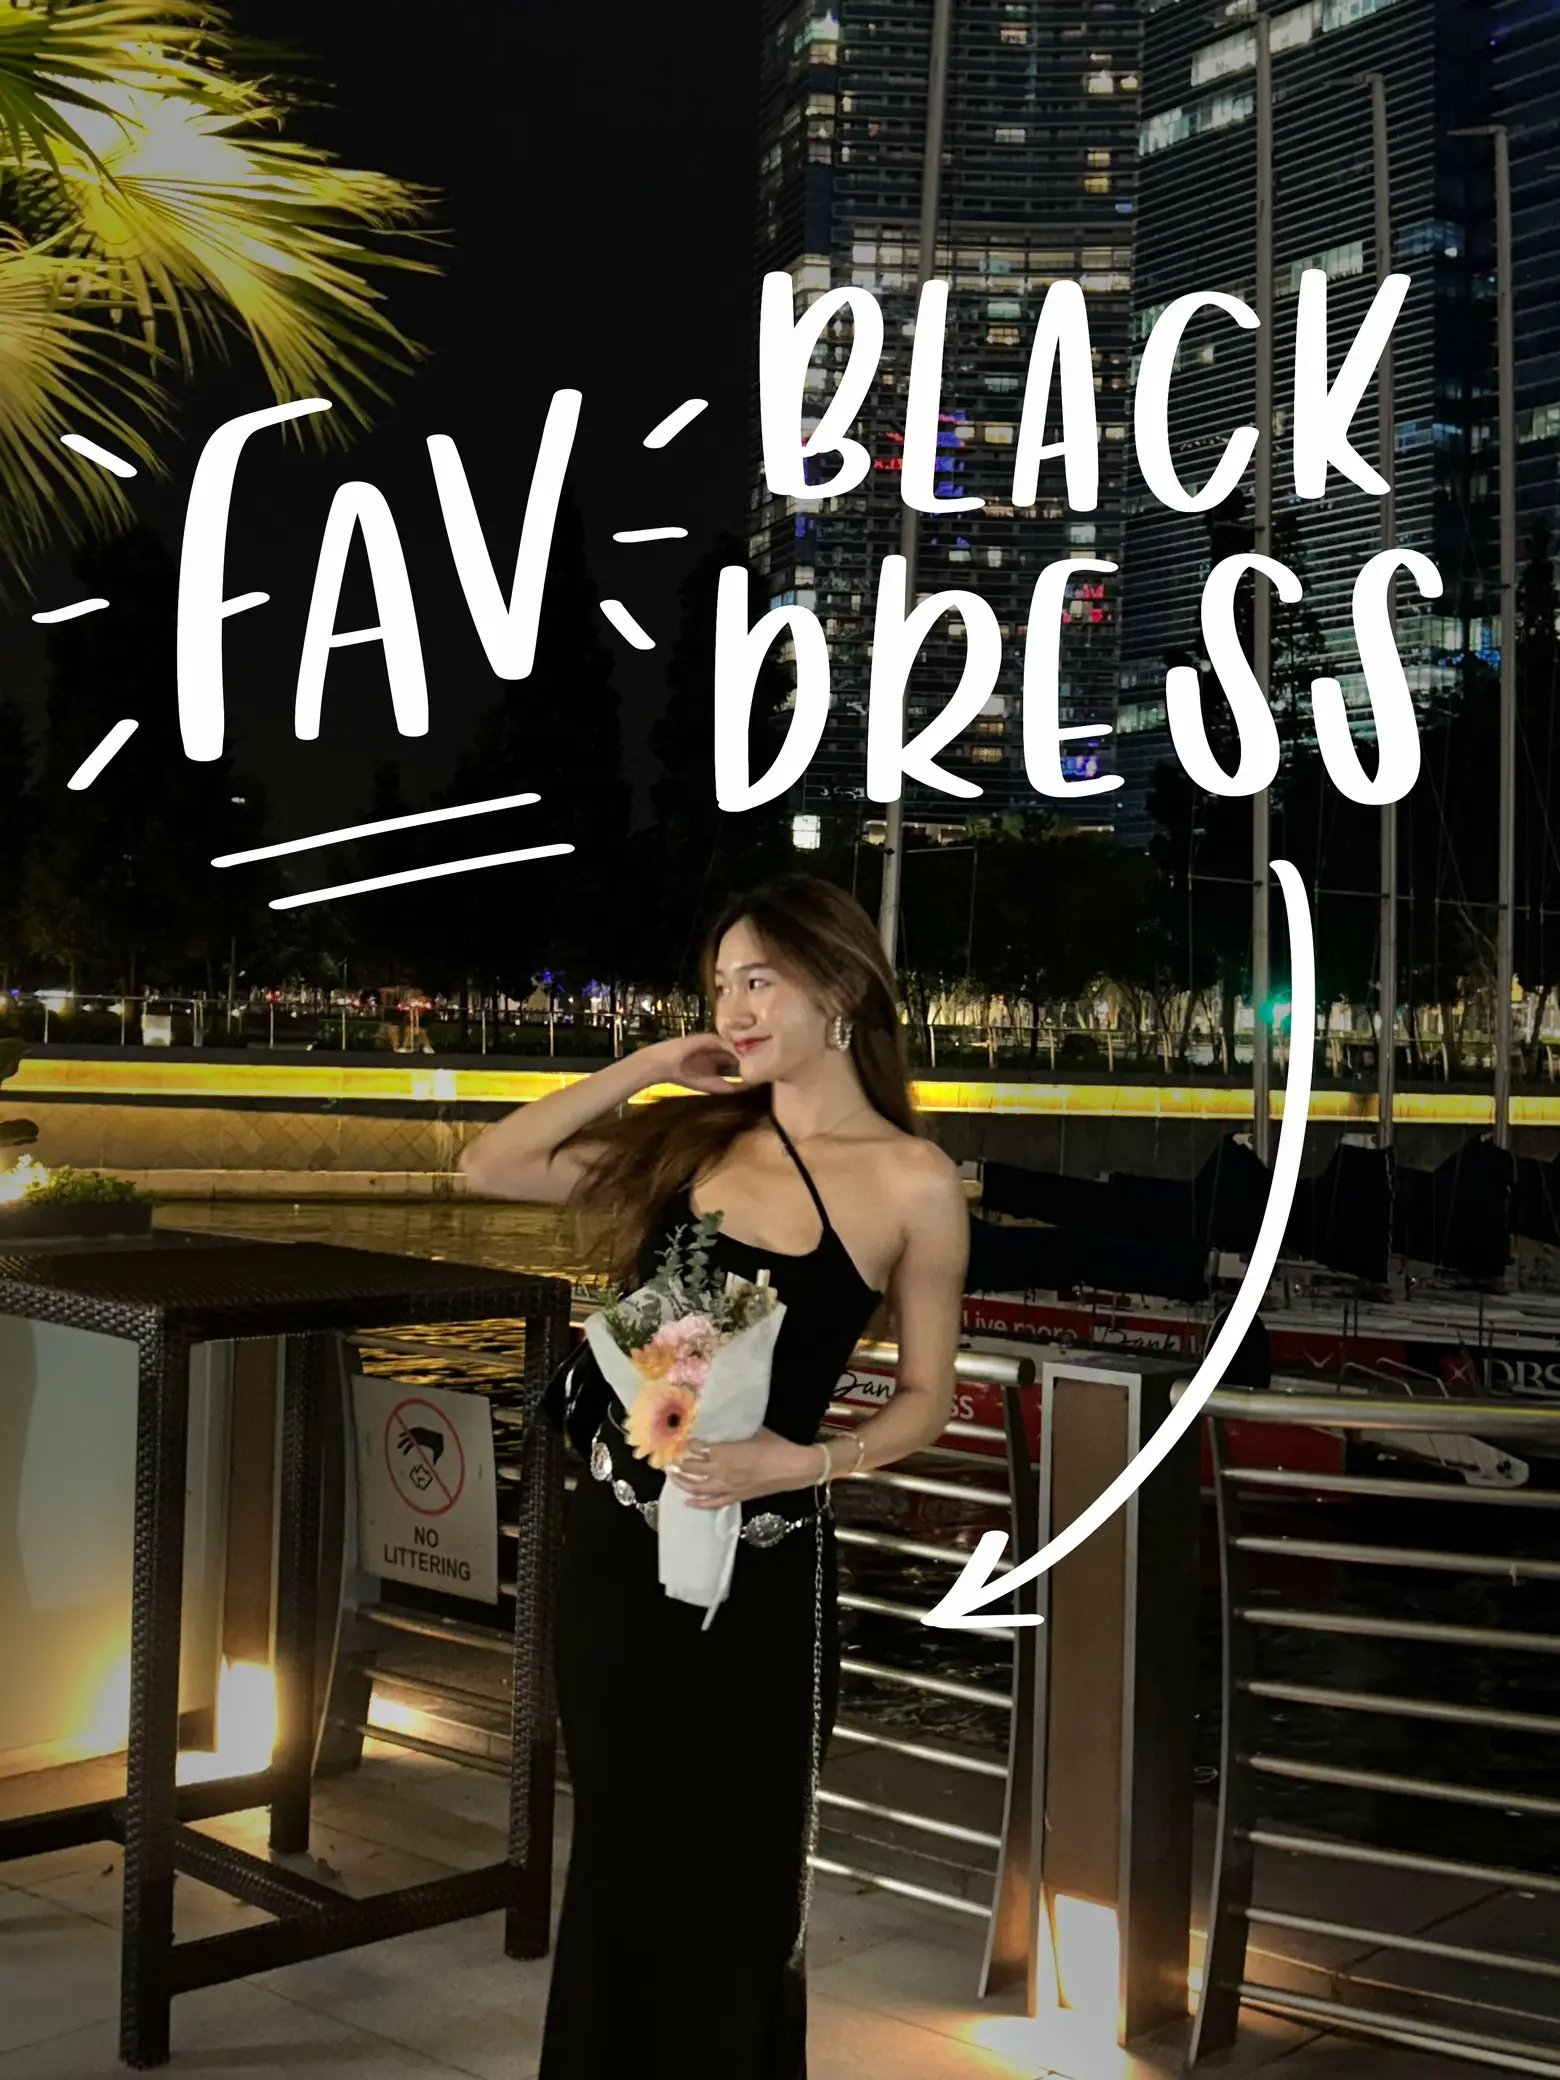 the ONLY black dinner dress you need | Gallery posted by ani | Lemon8